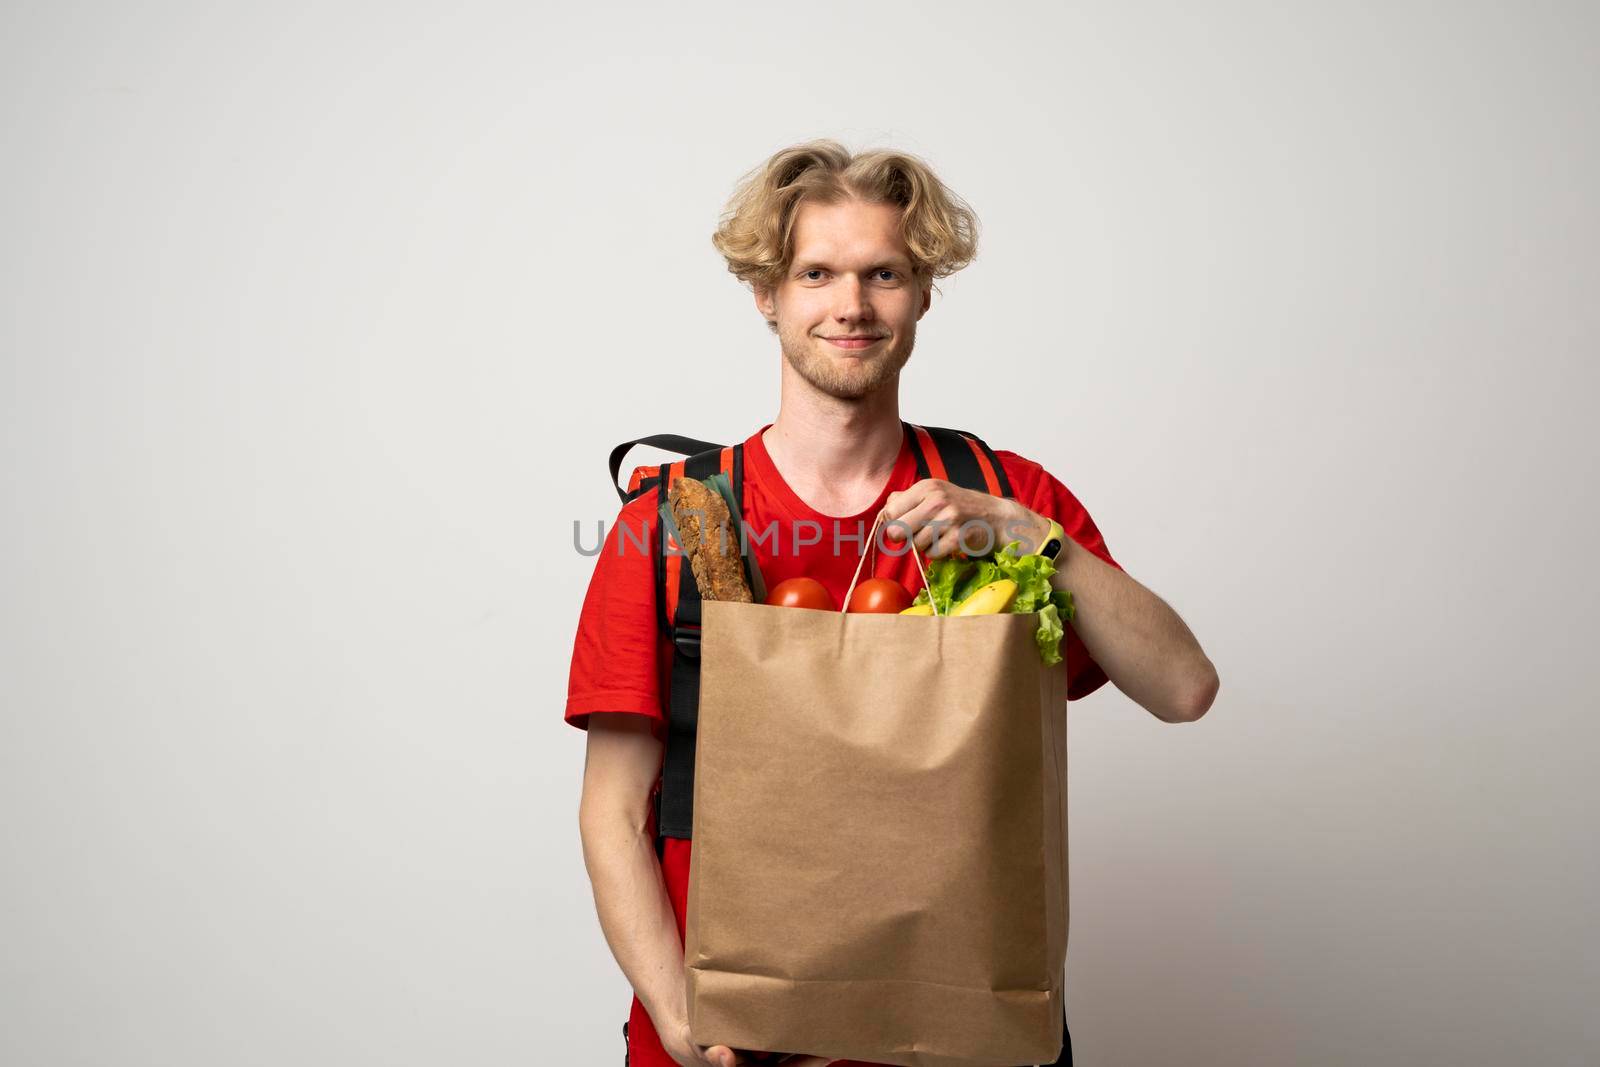 Man holding paper bag with fresh products from a groceries store on white background. Food delivery service